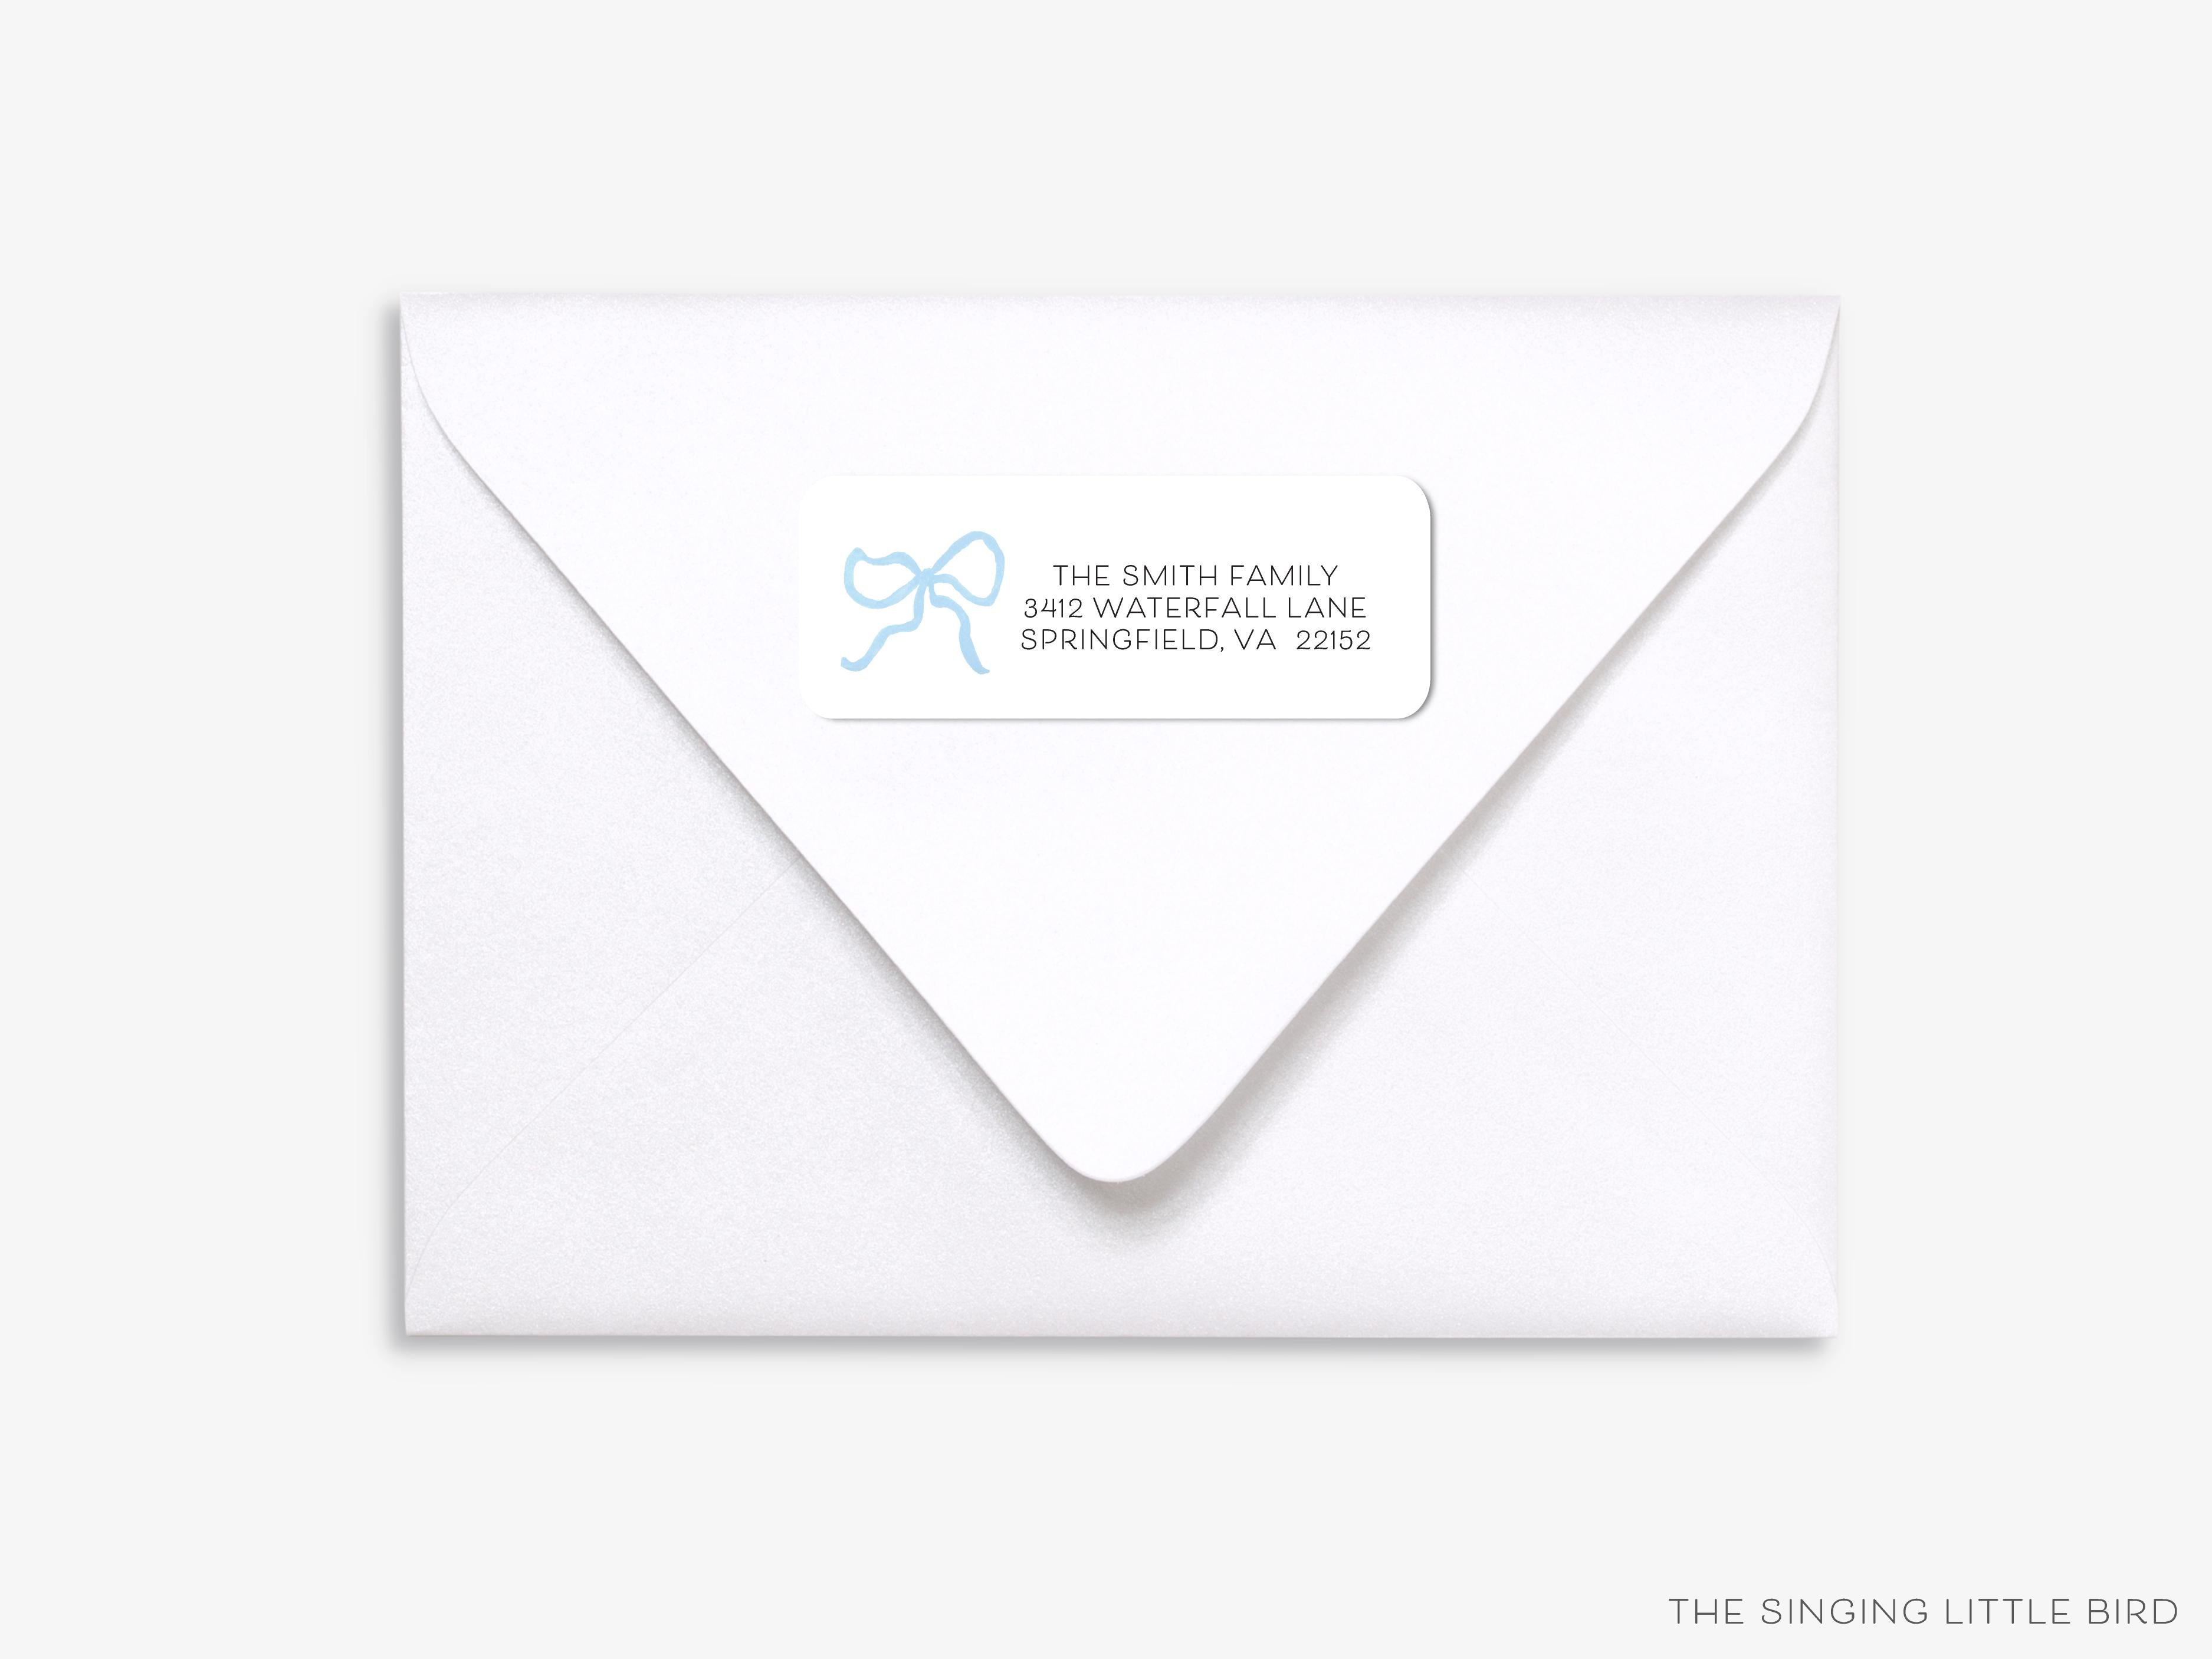 Light Blue Bow Return Address Labels-These personalized return address labels are 2.625" x 1" and feature our hand-painted watercolor bow, printed in the USA on beautiful matte finish labels. These make great gifts for yourself or the bow lover.-The Singing Little Bird